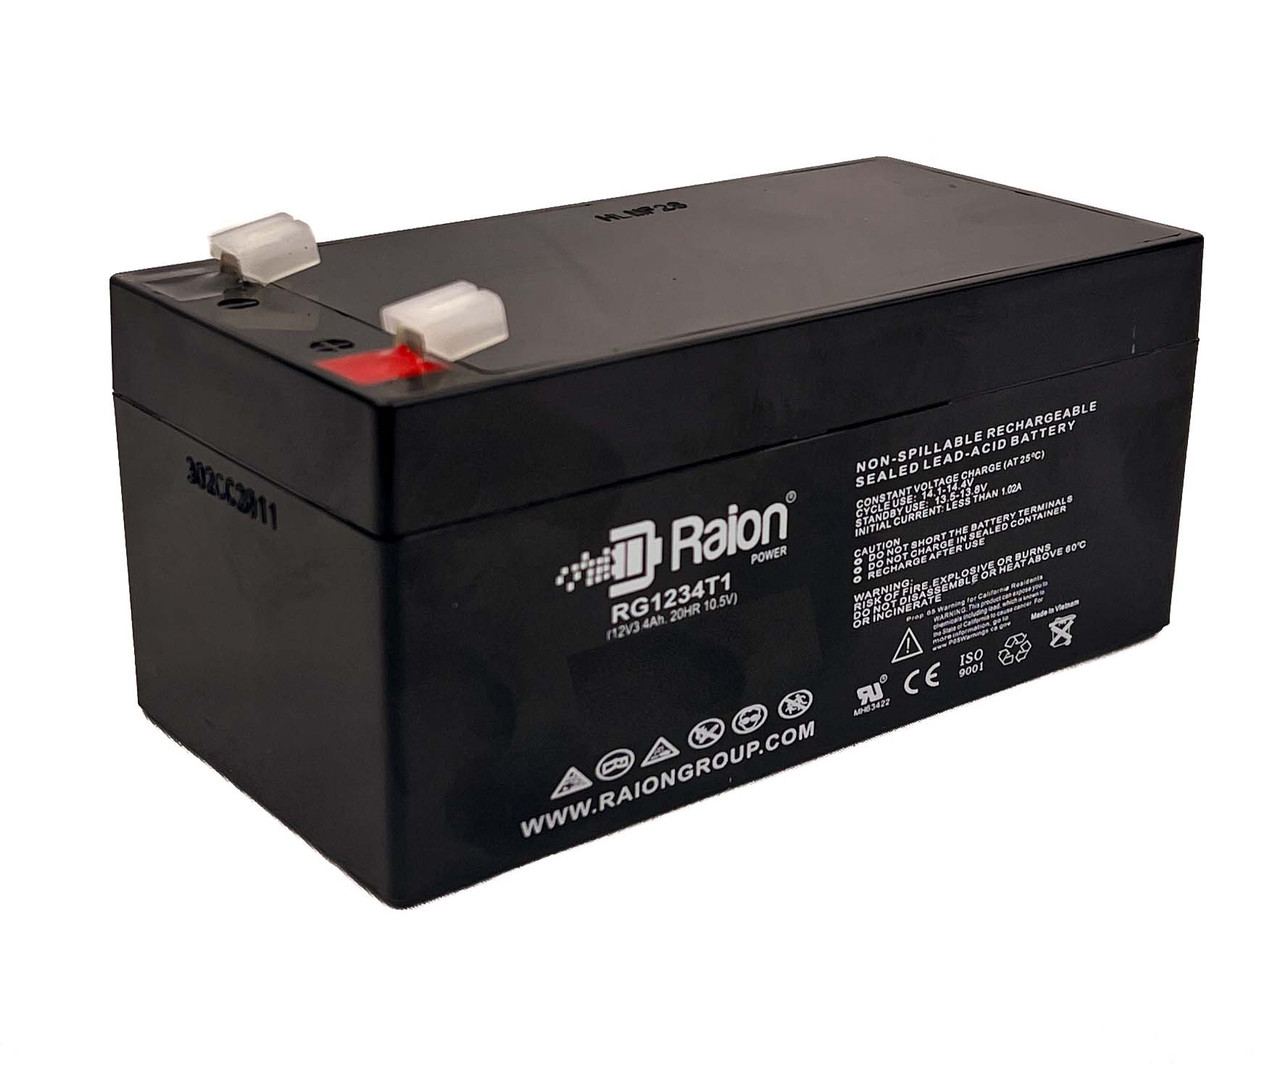 Raion Power 12V 3.4Ah Non-Spillable Replacement Battery for Amsco Hall Orthoscope